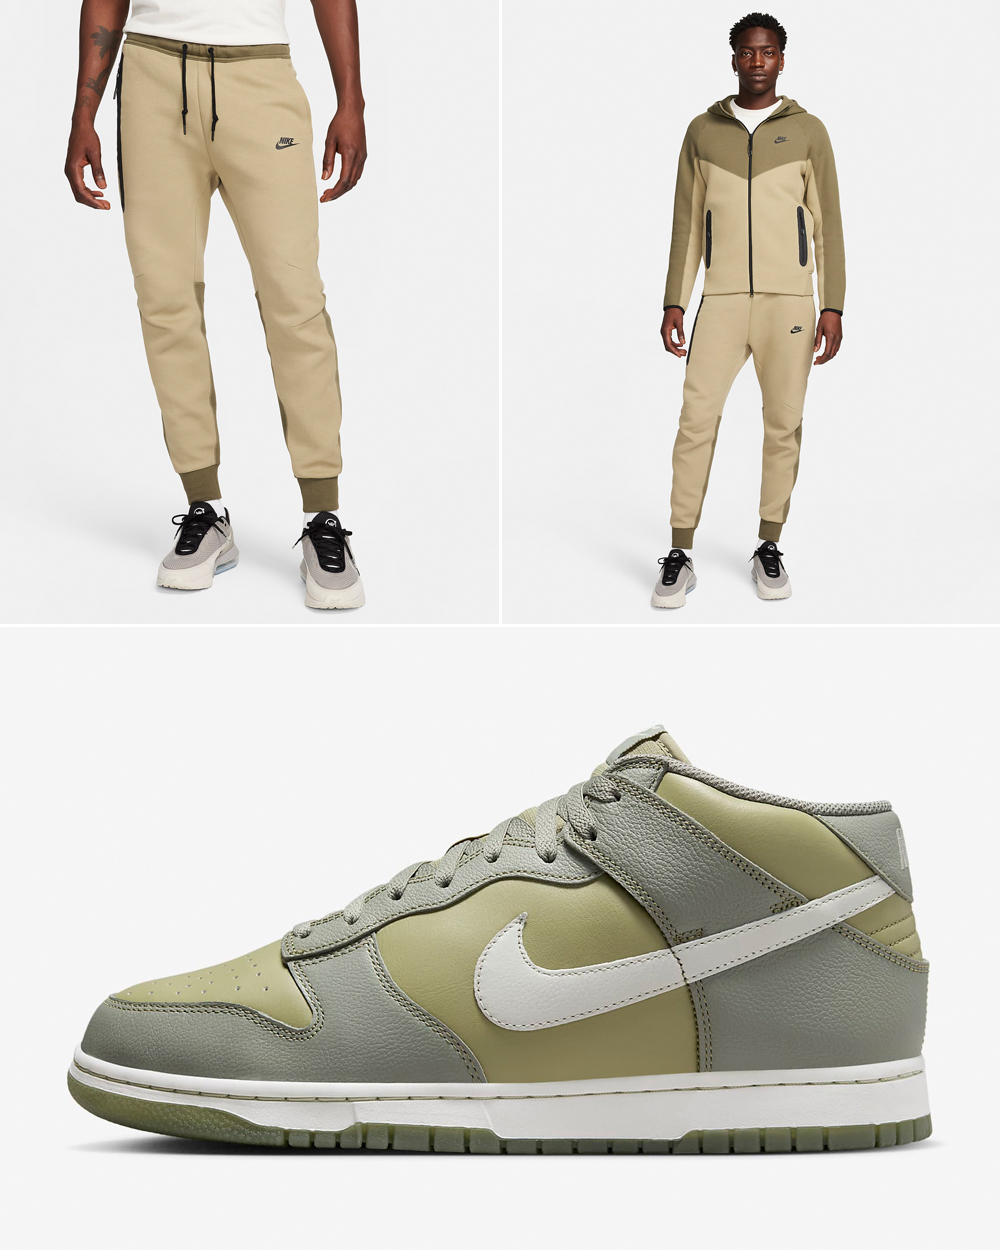 Nike-Dunk-Mid-Dark-Stucco-Neutral-Olive-Hoodie-Pants-Matching-Outfit